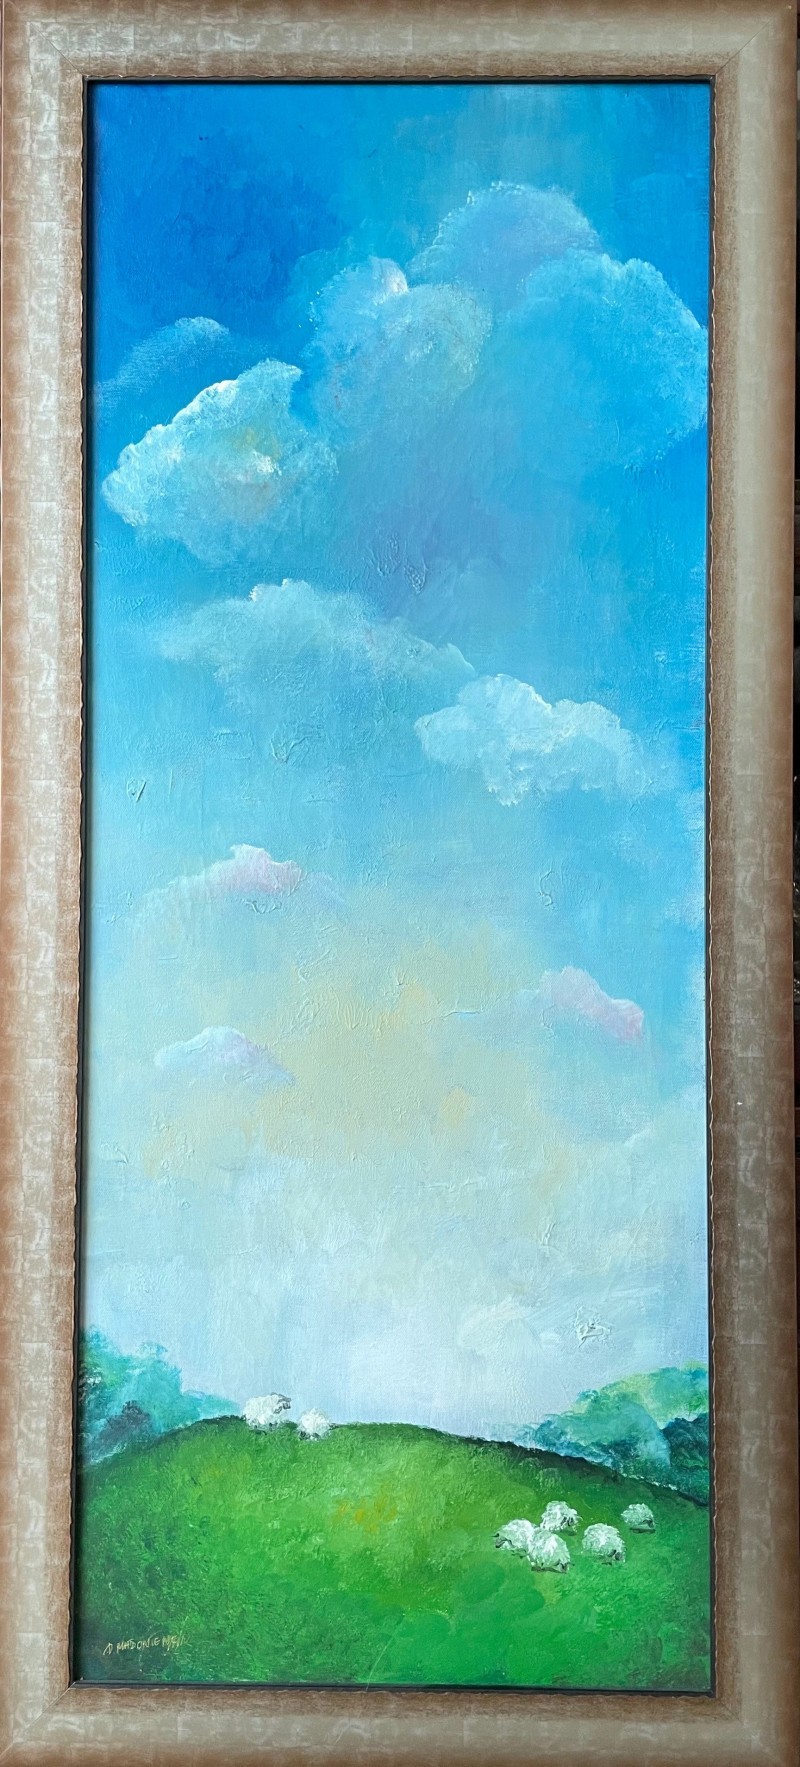 Sheep Sky original painting by Daiva Mažo. Landscapes